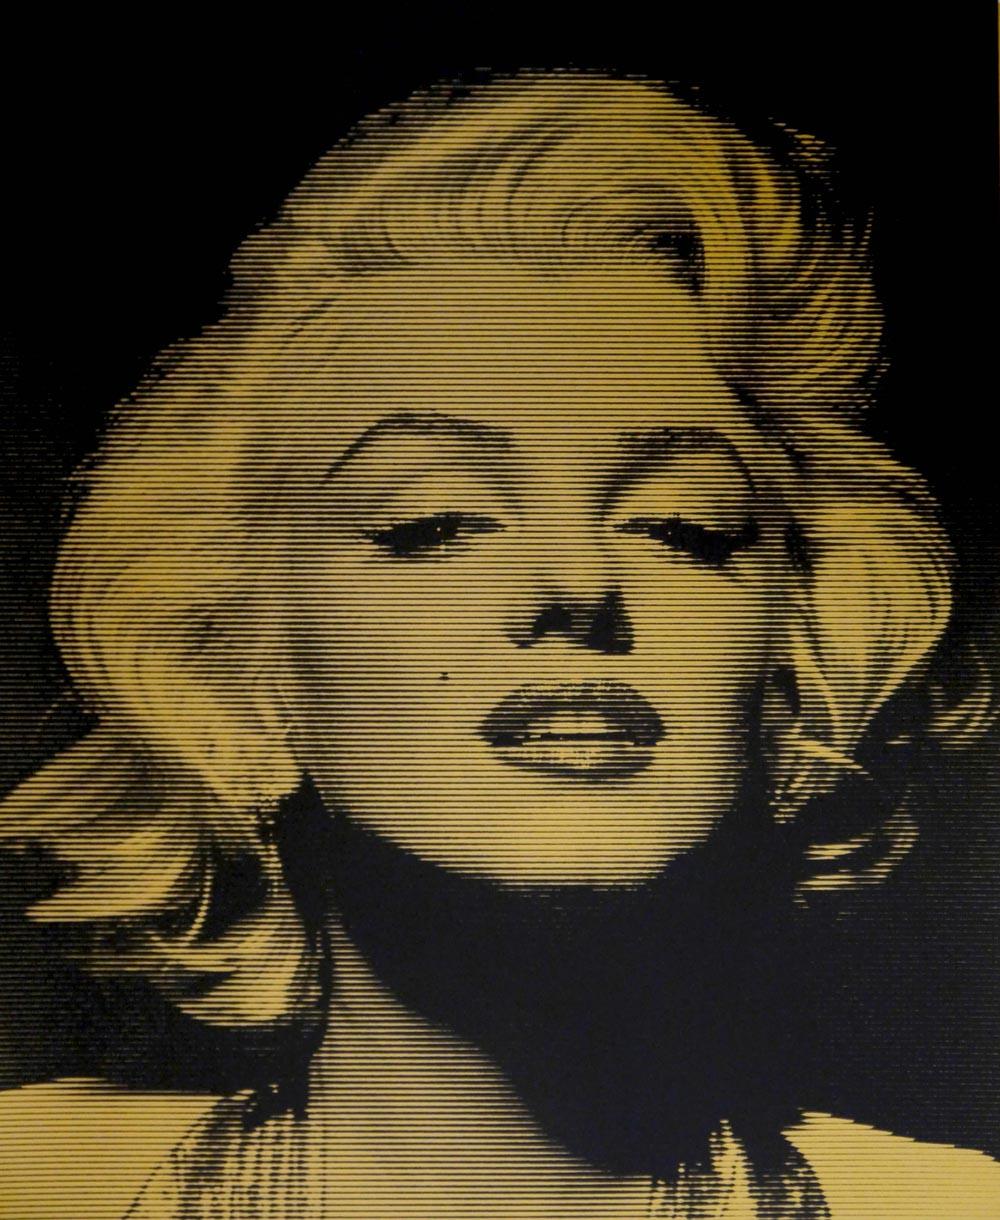 Gold Marylin Monroe, limited edition gold Screen print